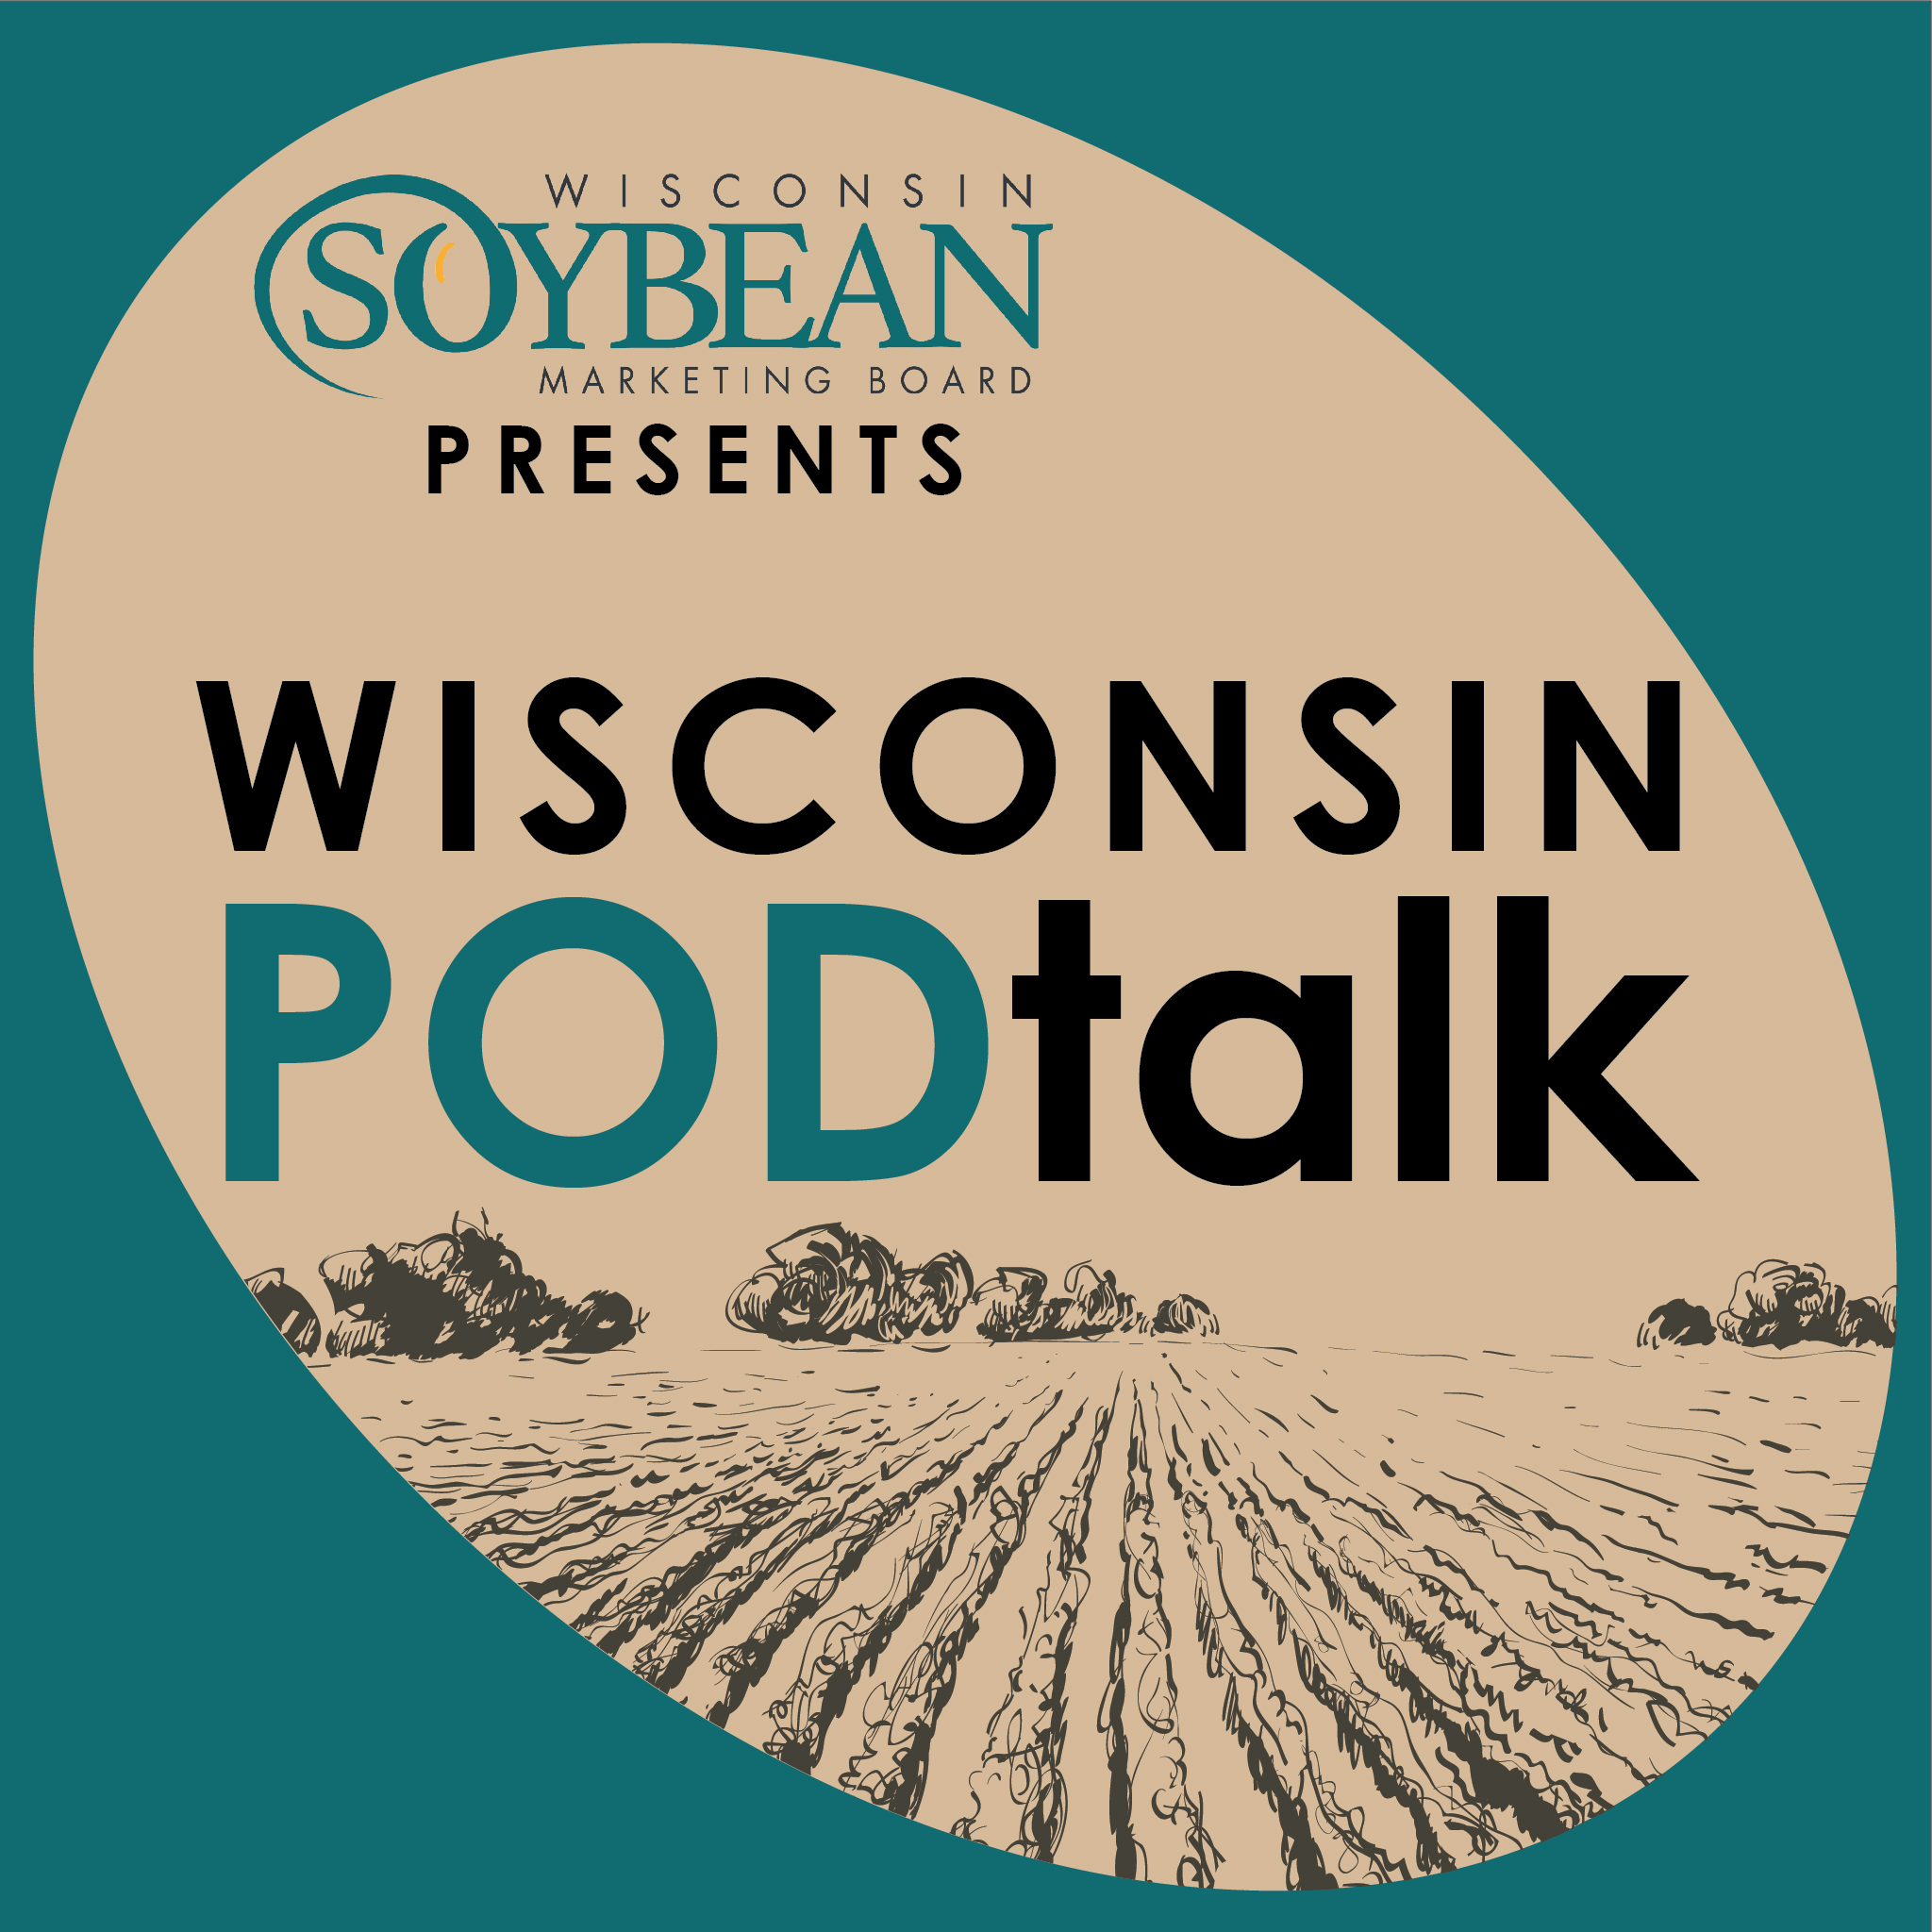 Technology, Research, and WI Soybean Checkoff